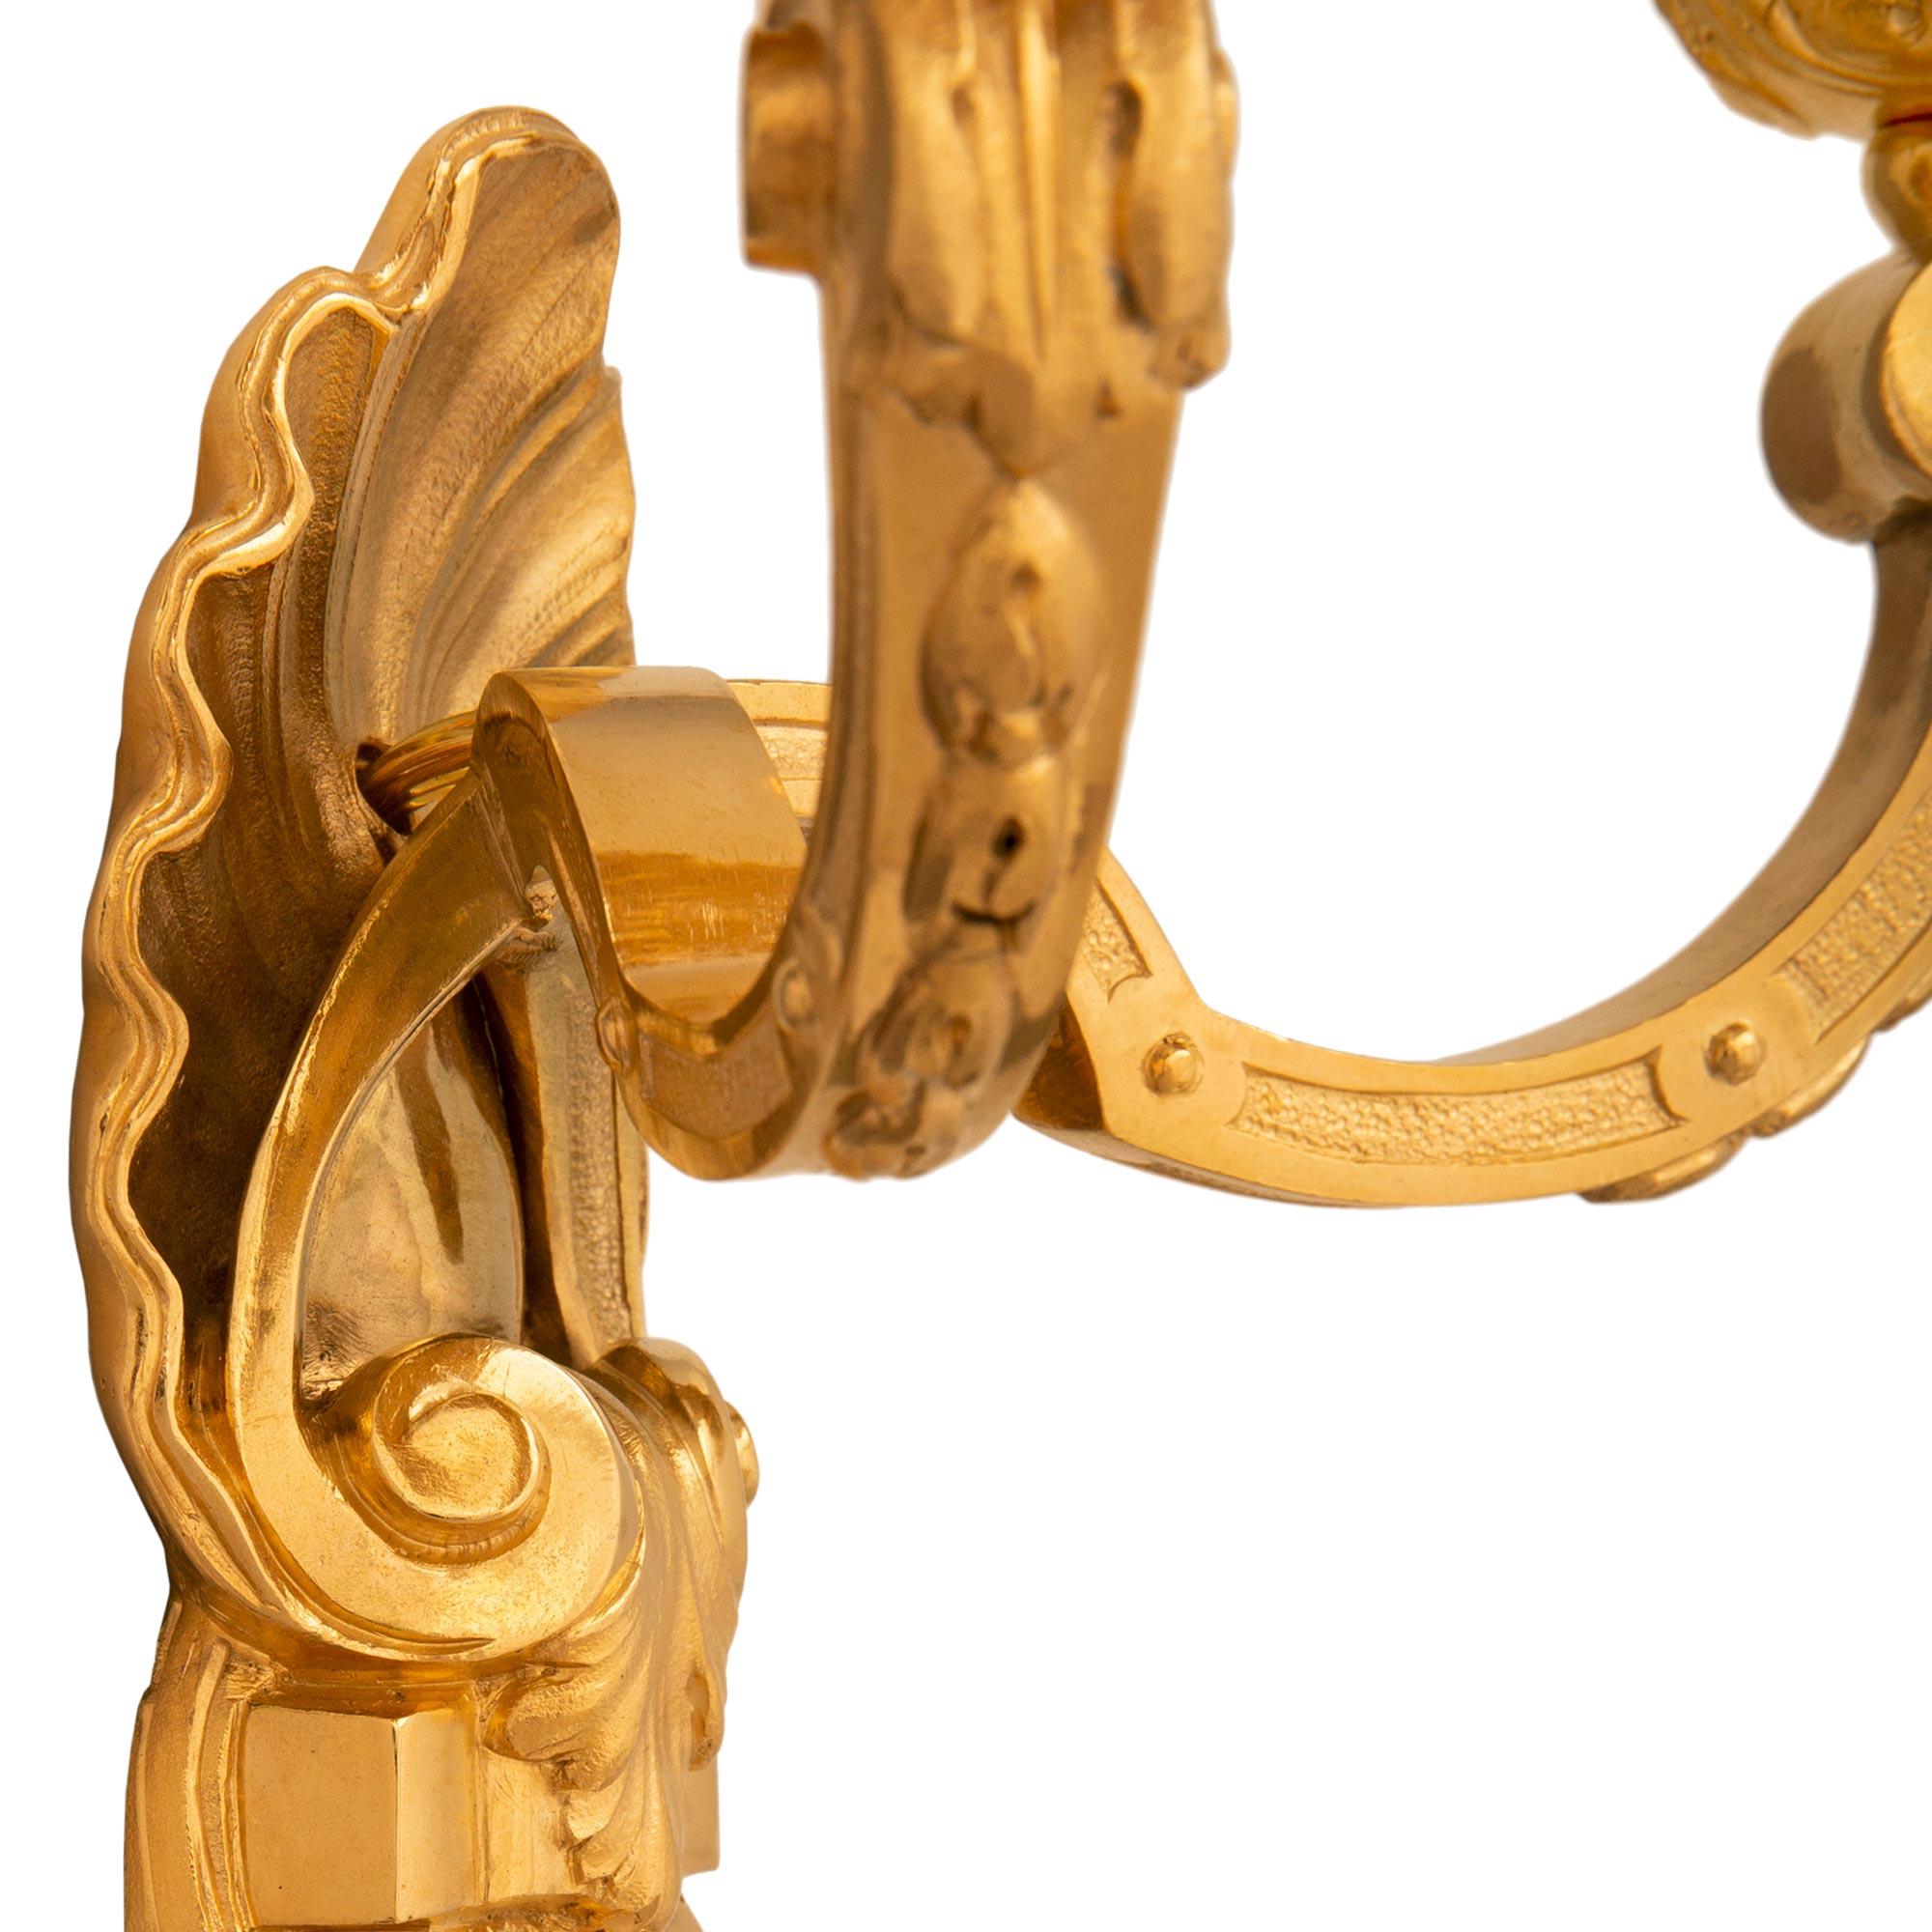 A beautiful pair of French 19th century Louis XVI st. Ormolu sconces. Each two arm sconce in centered by berried acanthus leaves leading up to additional scrolling movements below a stunning seashell reserve. The 'C' scrolled arms are decorated with